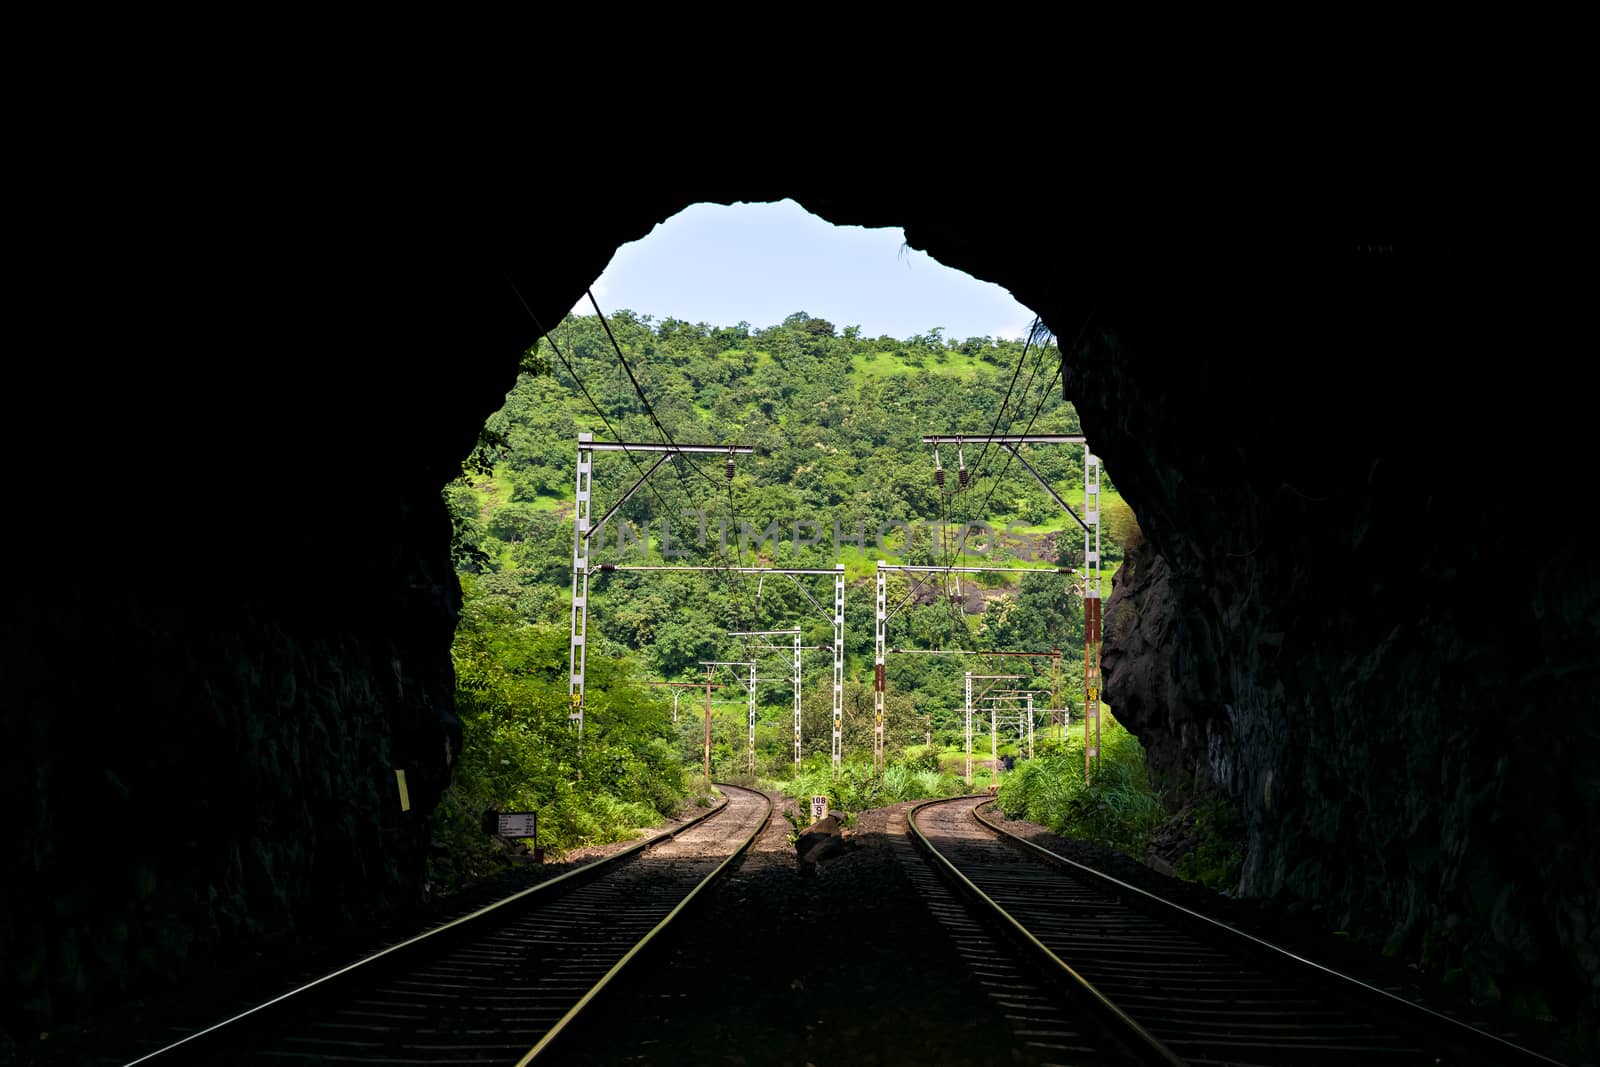 Photograph of view through a railway tunnel with tow diverging routes ahead.